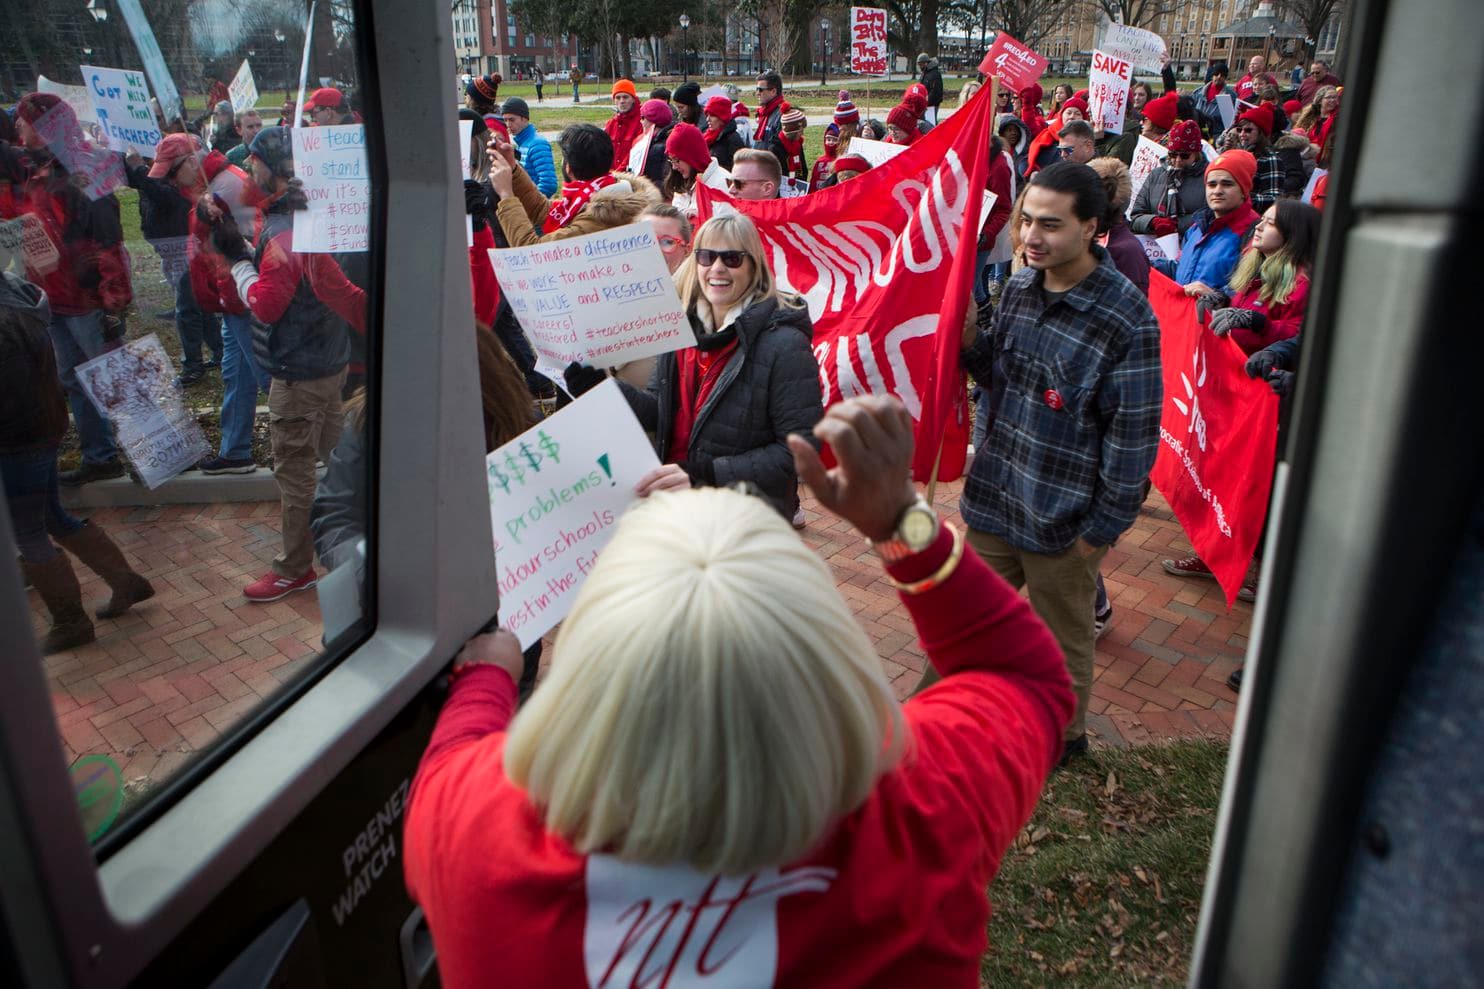 Donnetta Russell, a clerk specialist at Norview Middle School in Norfolk, cheered on educators in January as they called for more money for schools at the Virginia State Capitol. (Julia Rendleman/For The Washington Post)